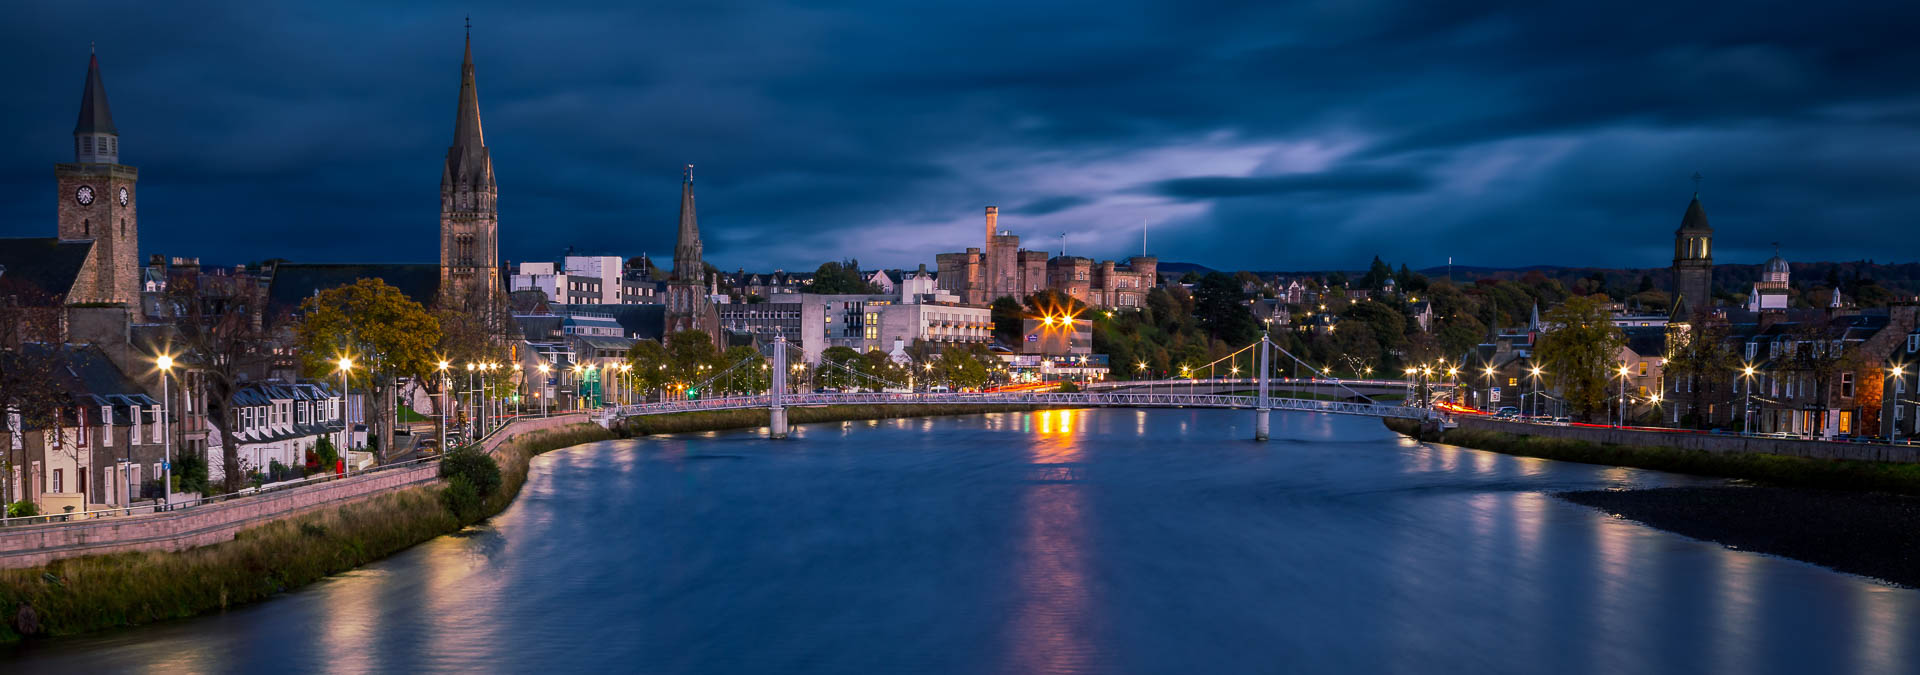 Scottish landscape photograph showing Inverness and the river ness at night